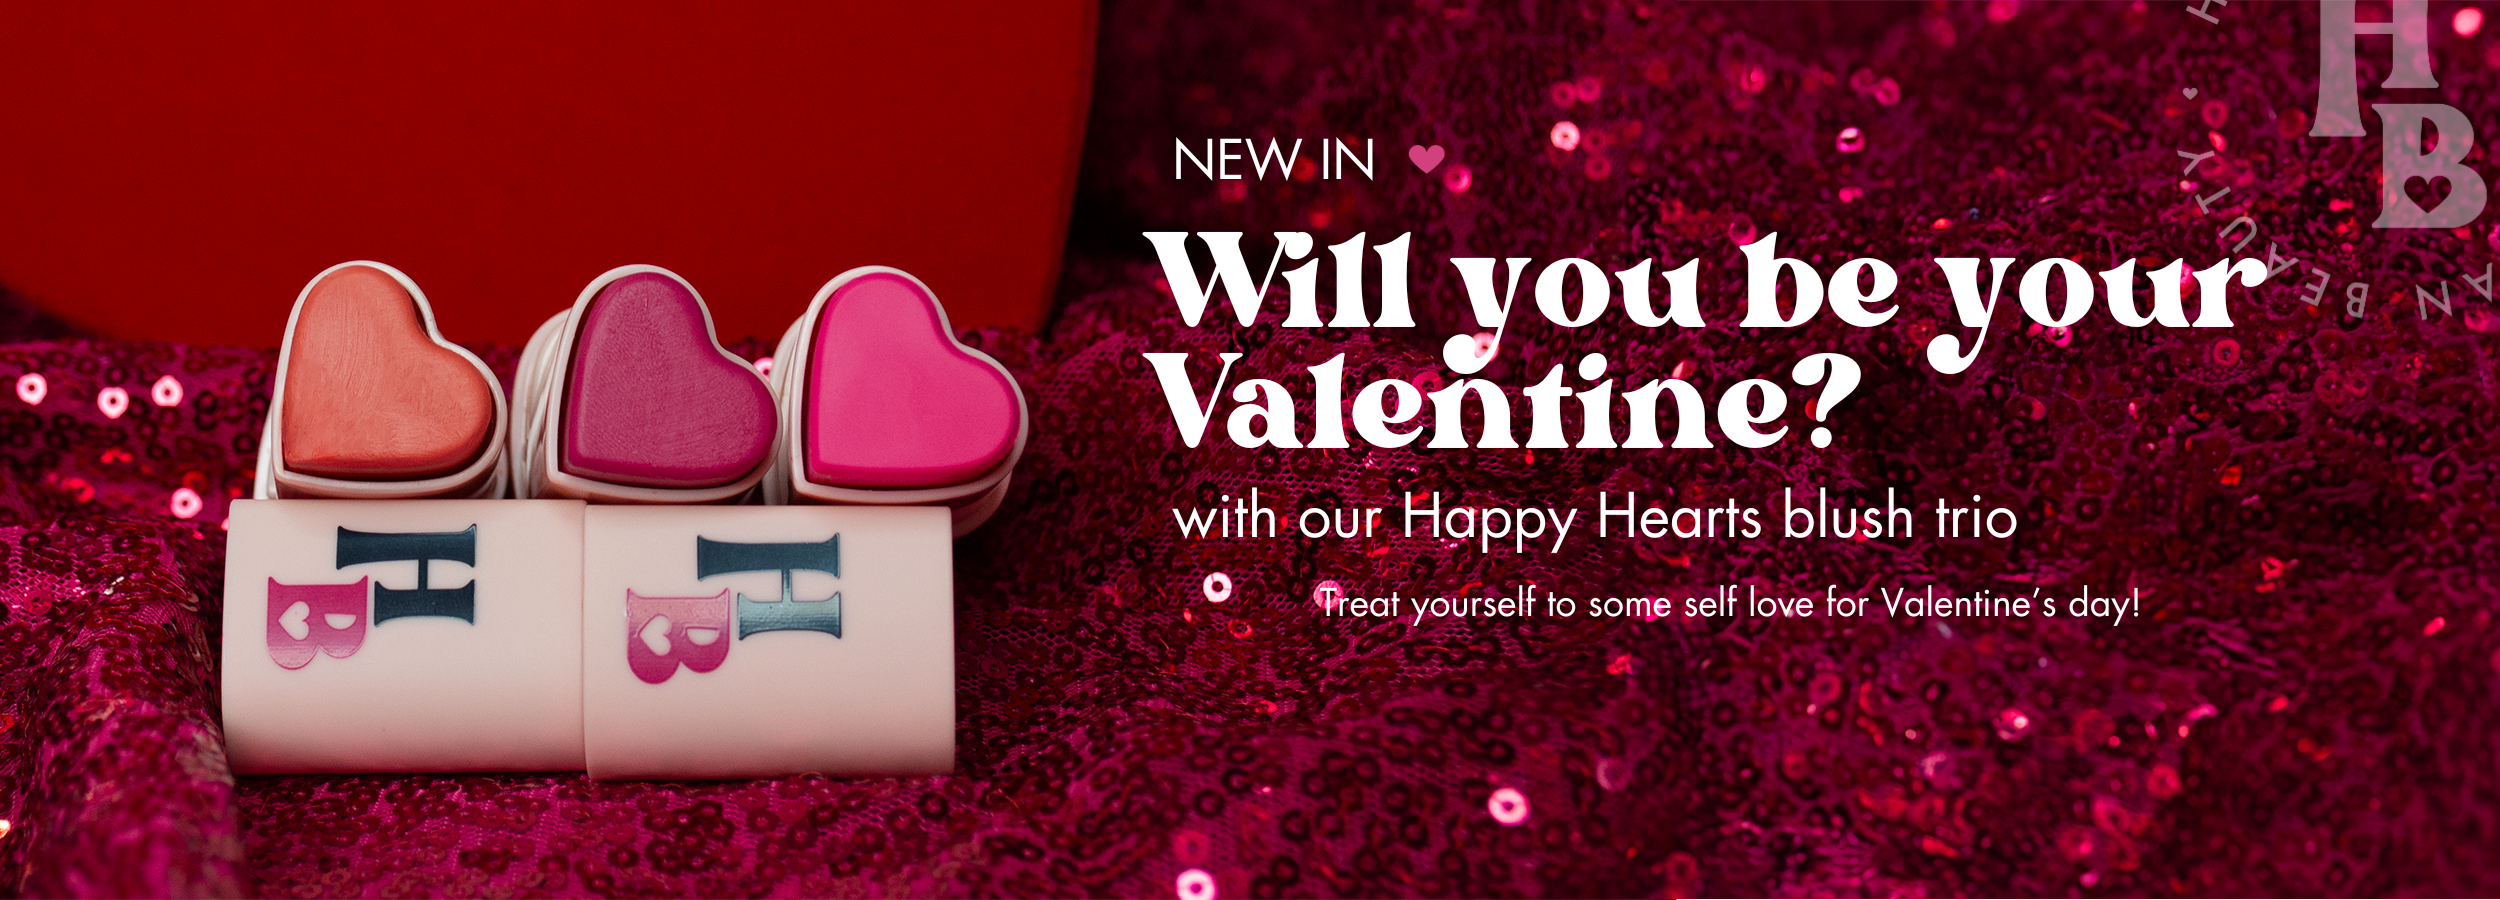 will you be your valentine? with our Happy Hearts blush trio - treat yourself to some self love for Valentines Day!